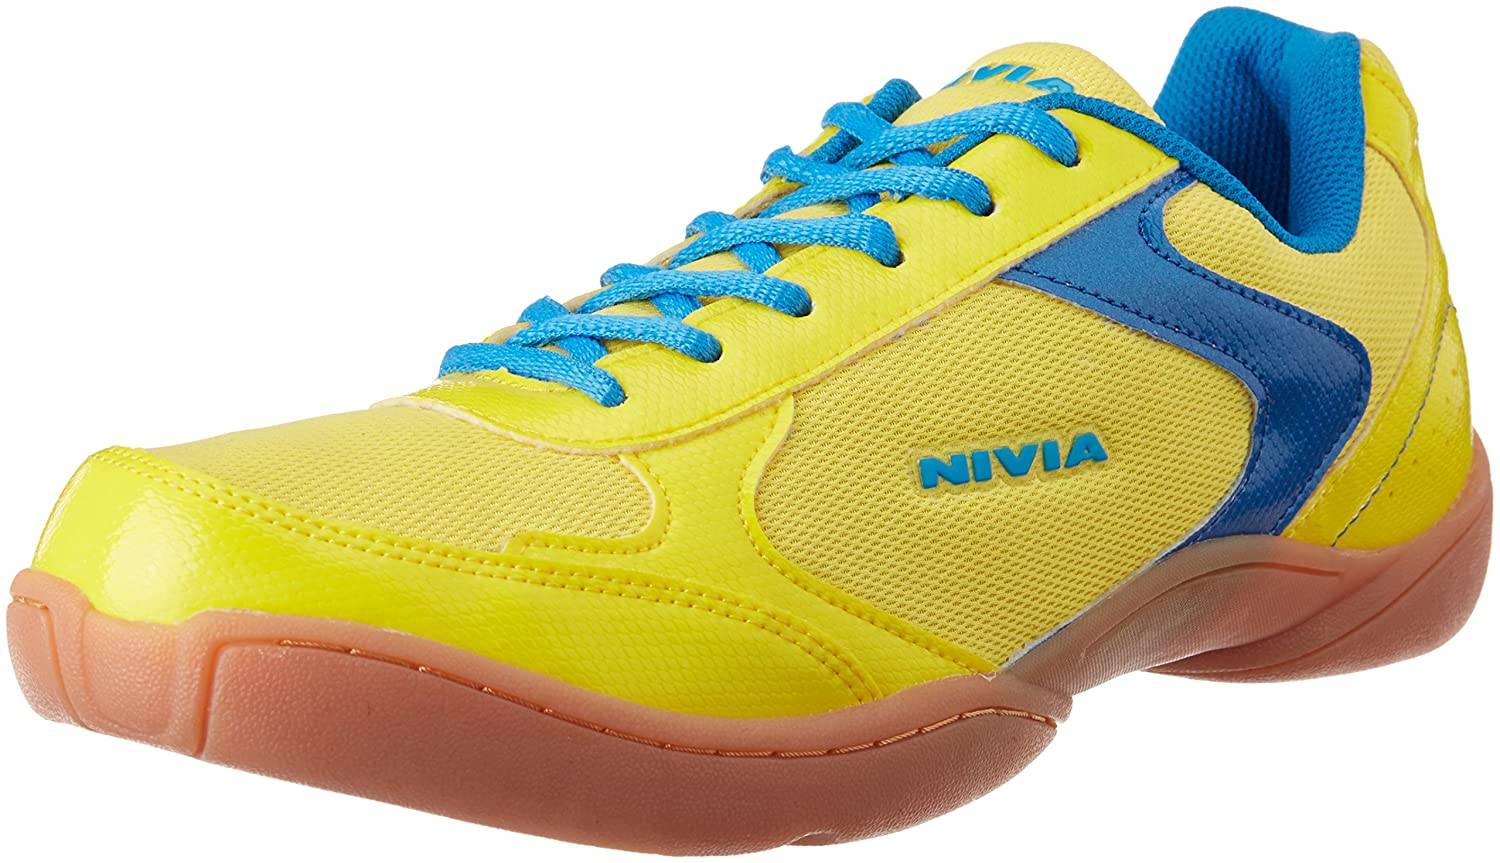 The ultimate badminton shoes for men 